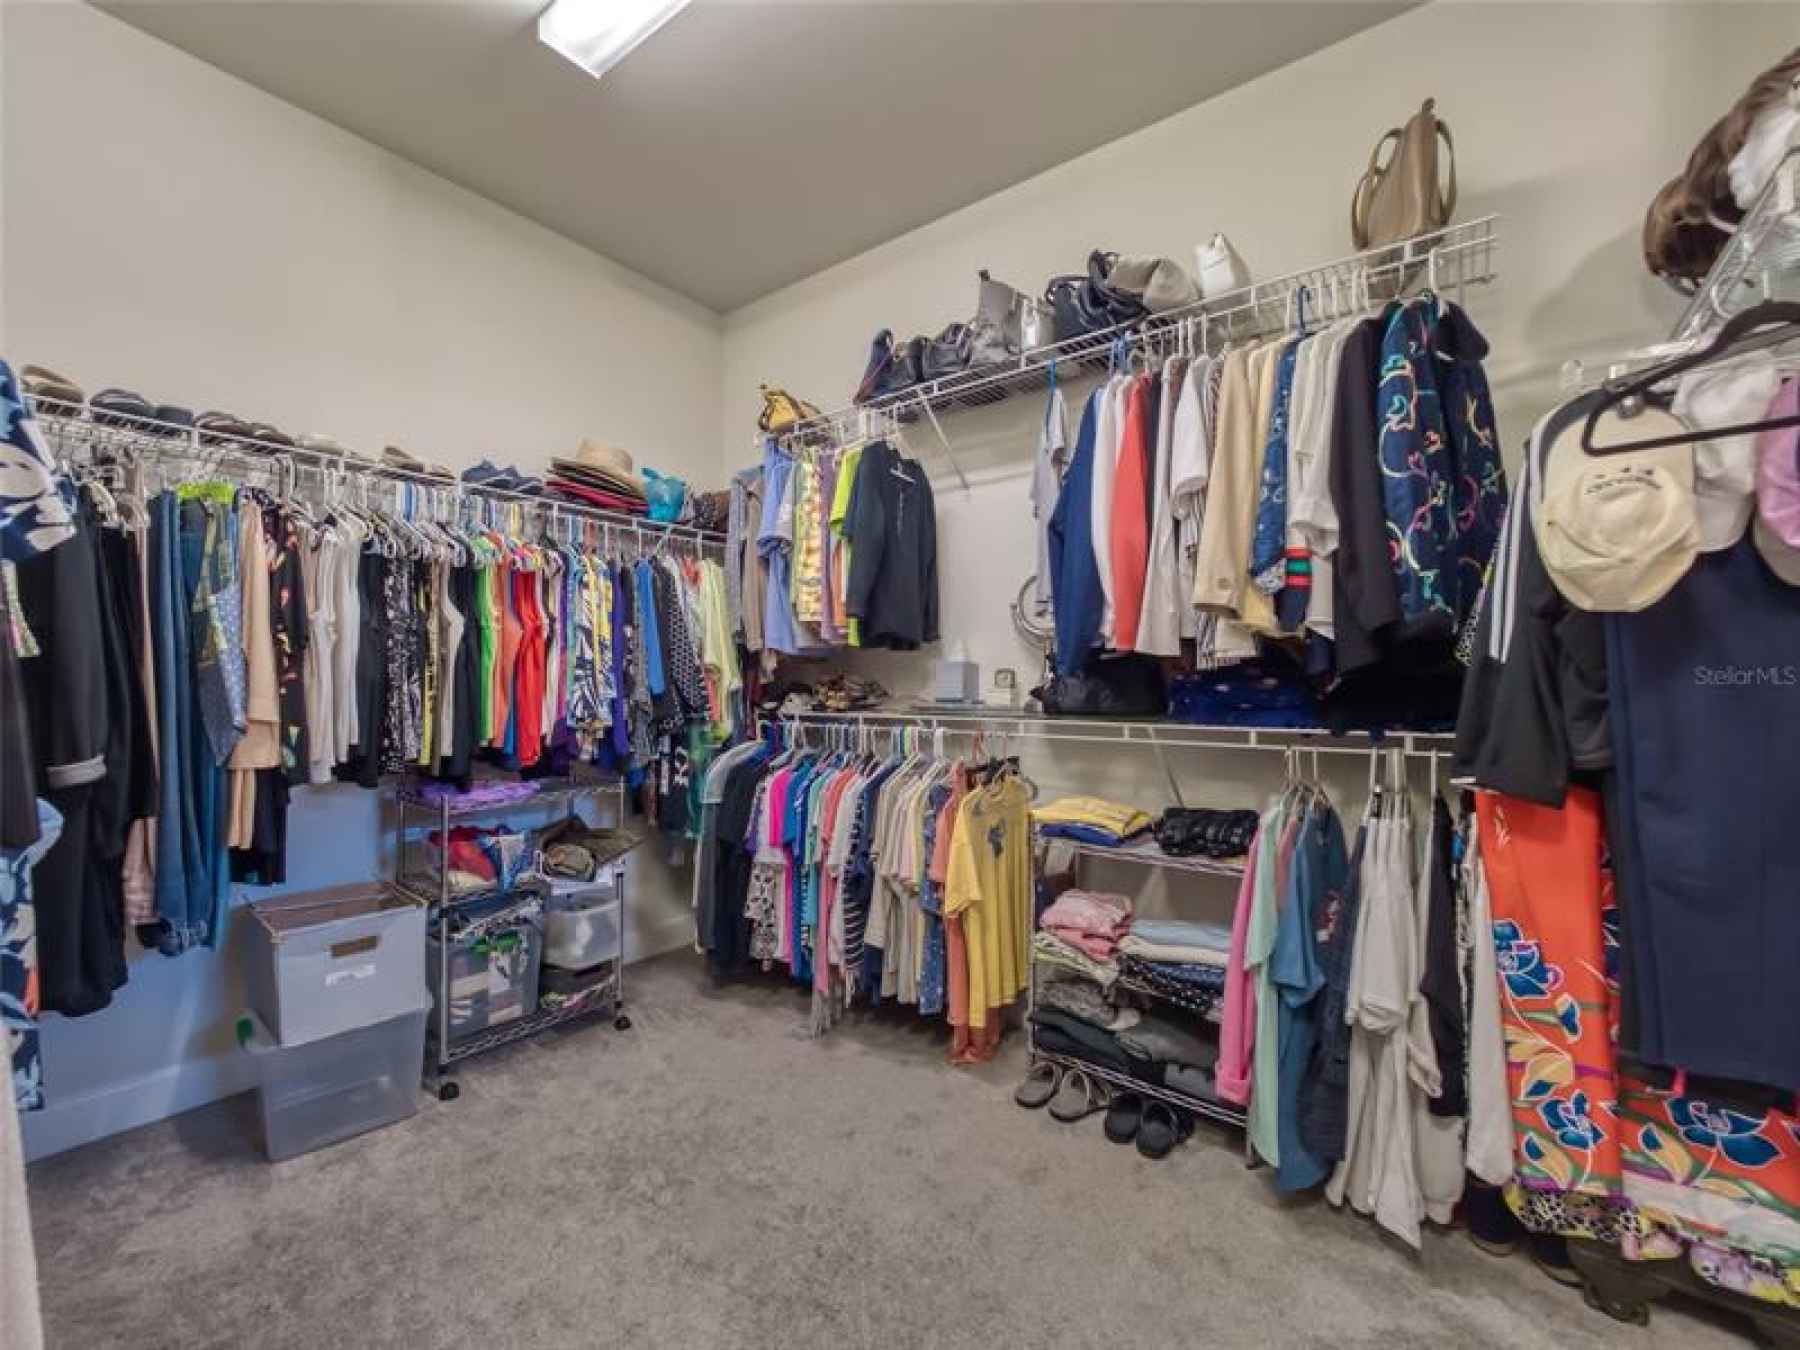 Master Closet offers space for clothing and more...